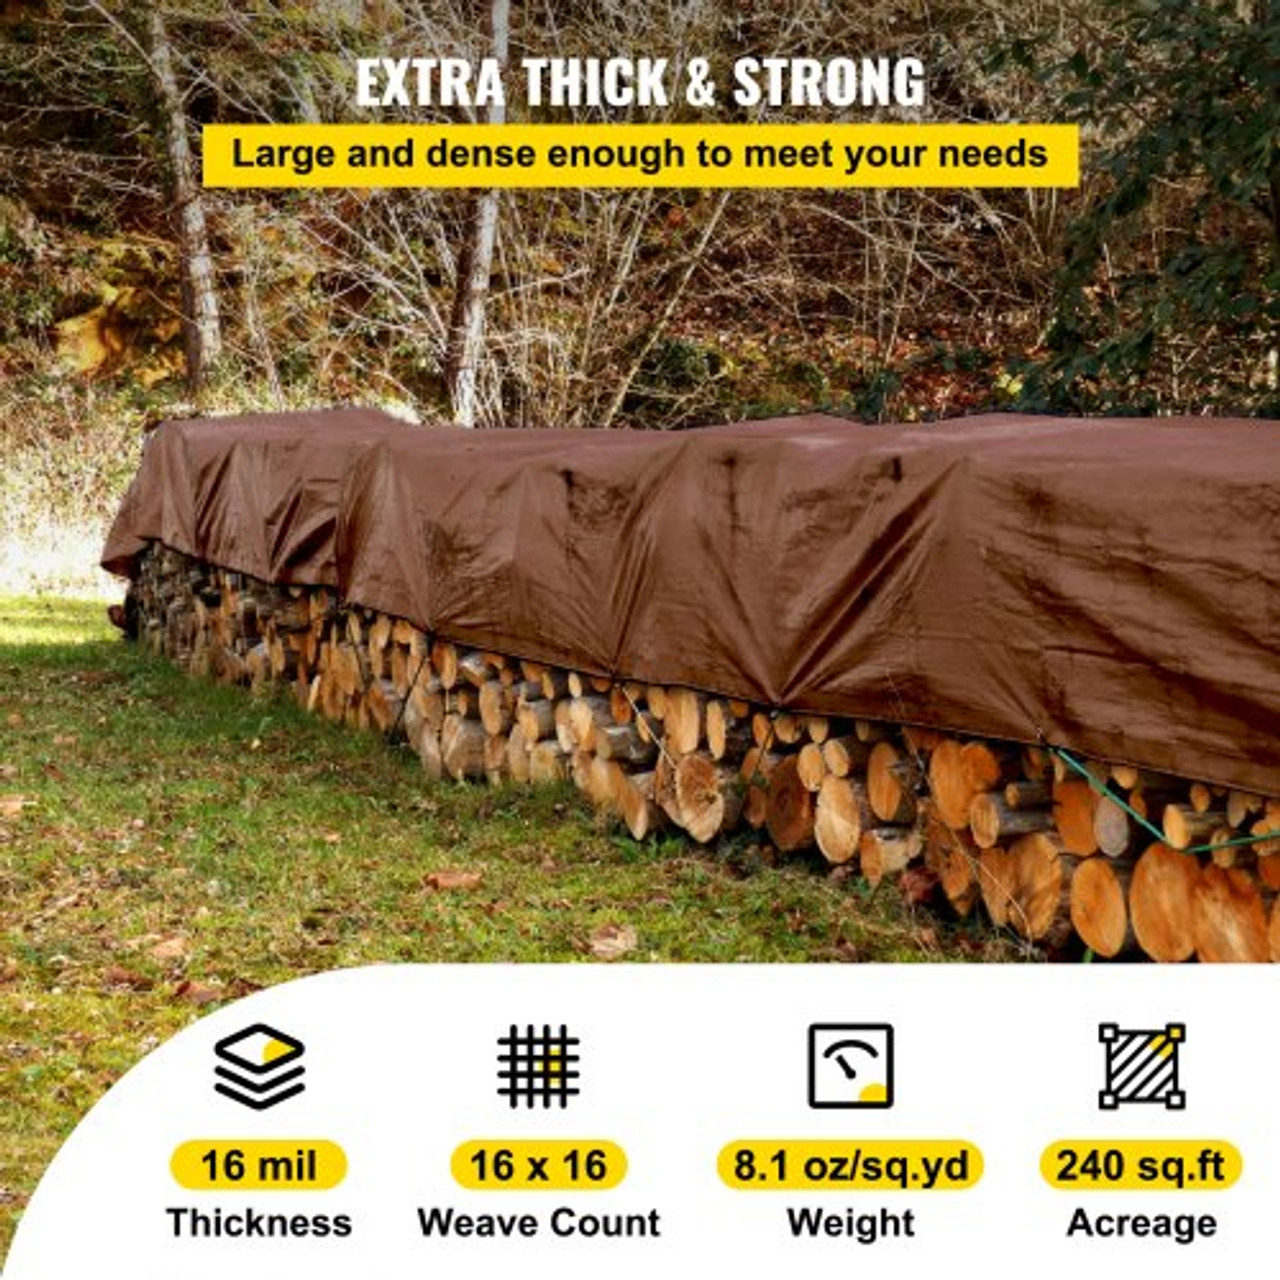 Heavy Duty Tarp, 12 x 20 ft 16 Mil Thick, Waterproof & Sunproof Outdoor Cover, Rip and Tear Proof PE Tarpaulin with Grommets and Reinforced Edges for Truck, RV, Boat, Roof, Tent, Camping, Brown